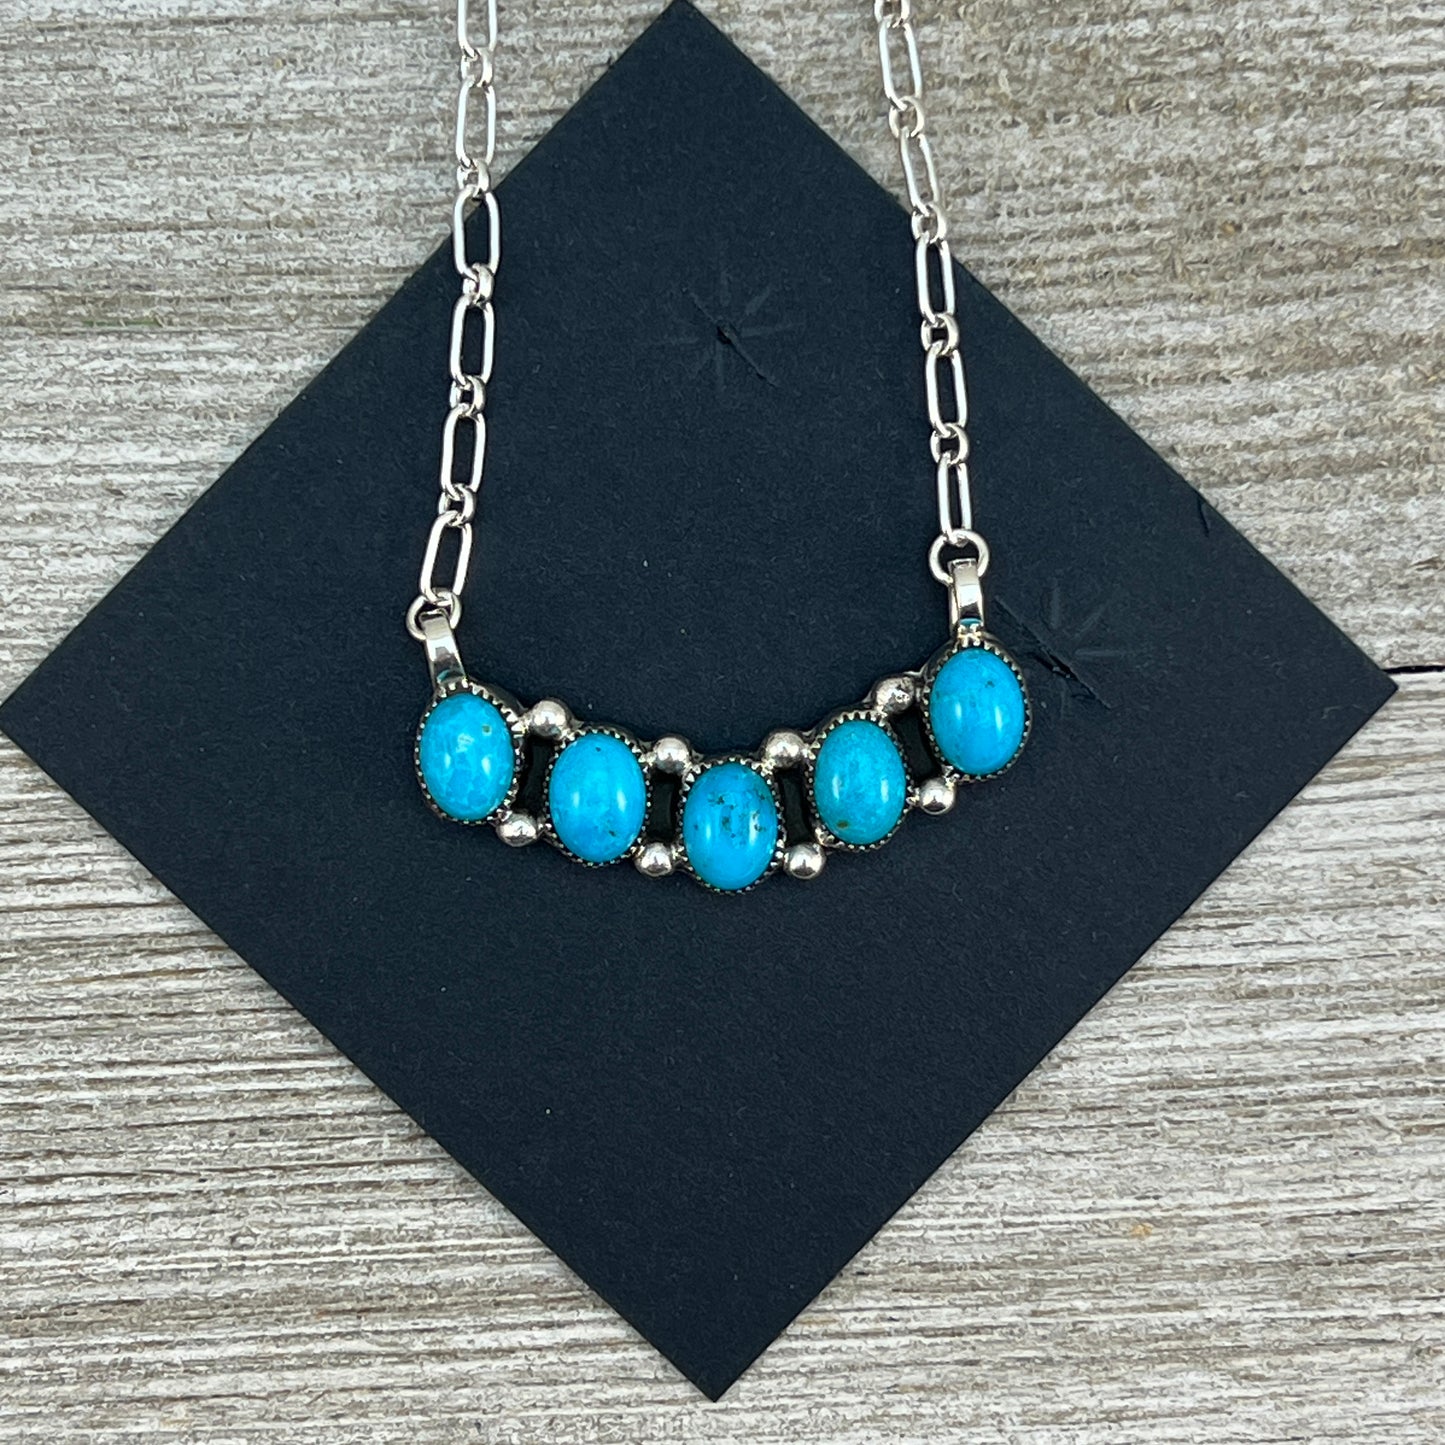 18" Blue Kingman Turquoise bar necklace #3, sterling silver by Navajo artist Kimberly Yazzie